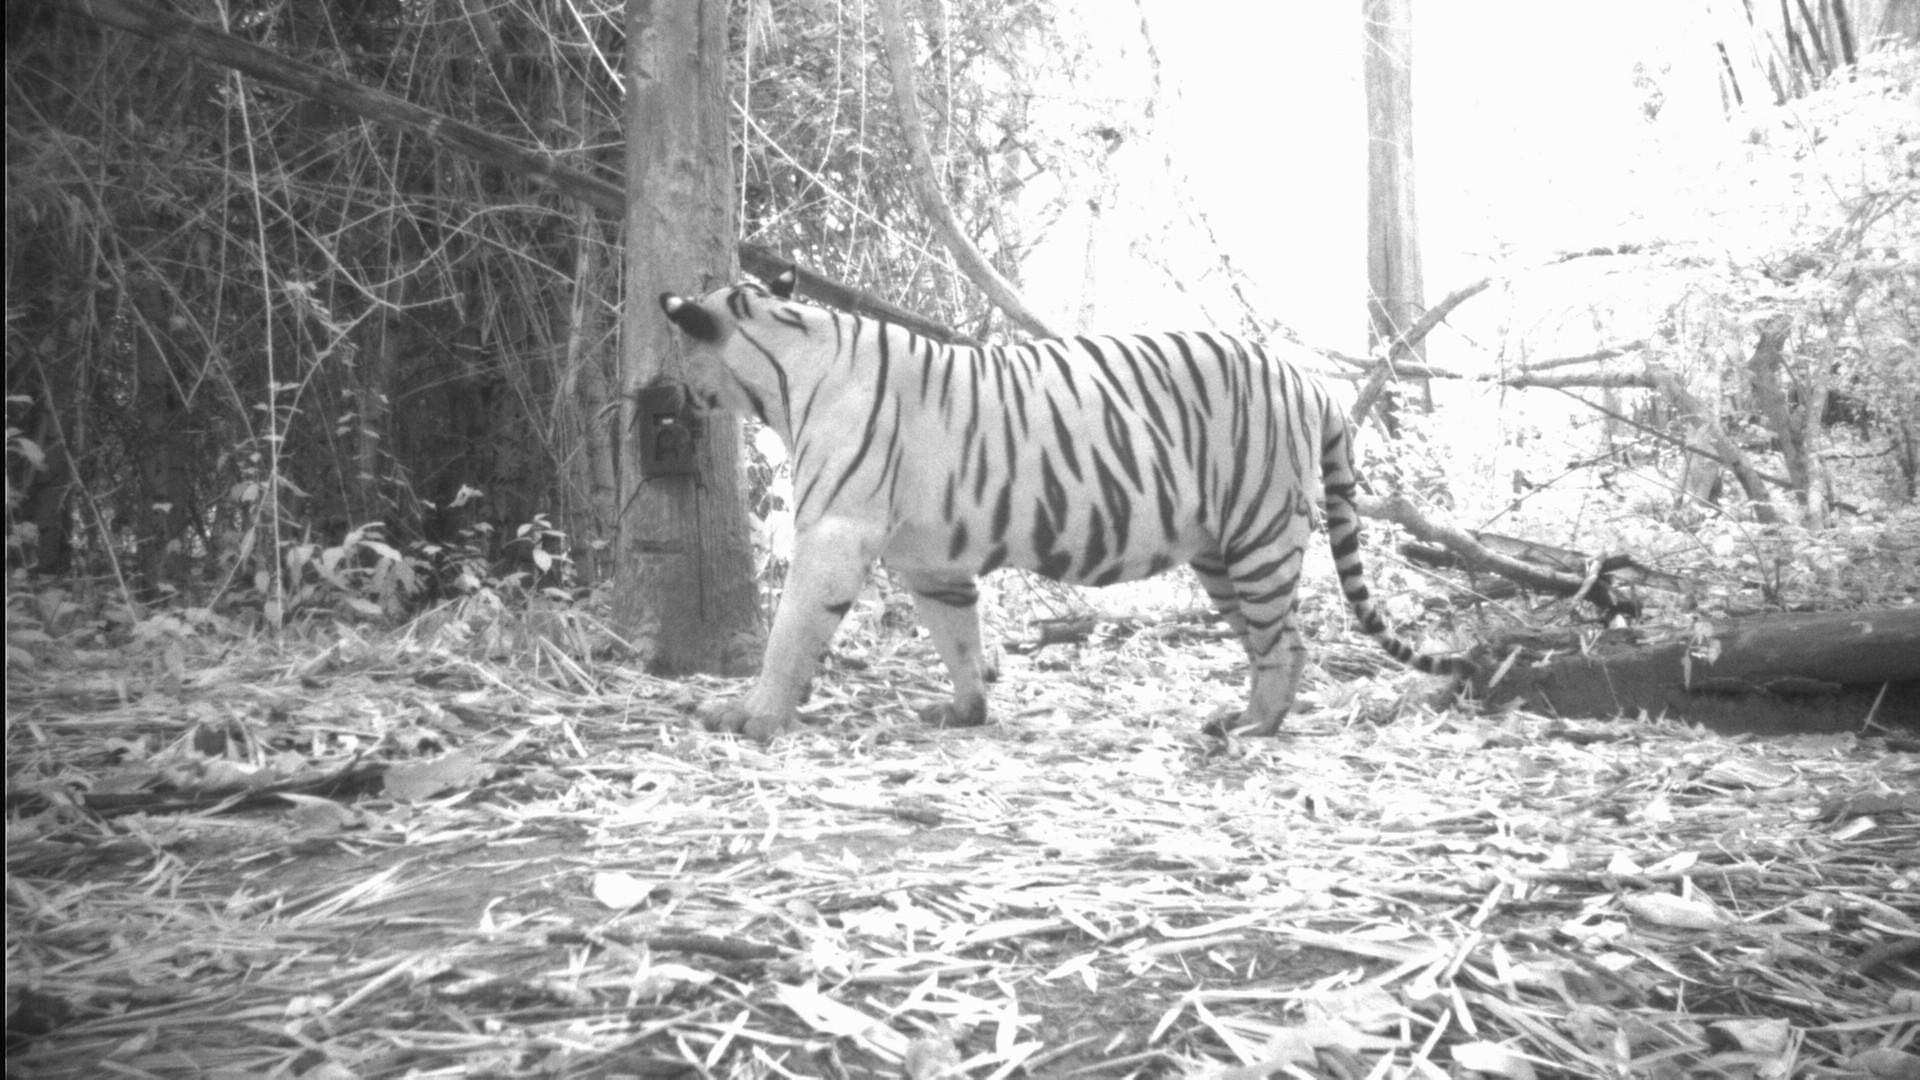 Rare tigers in Thailand spotted for first time in four years - The  Washington Post